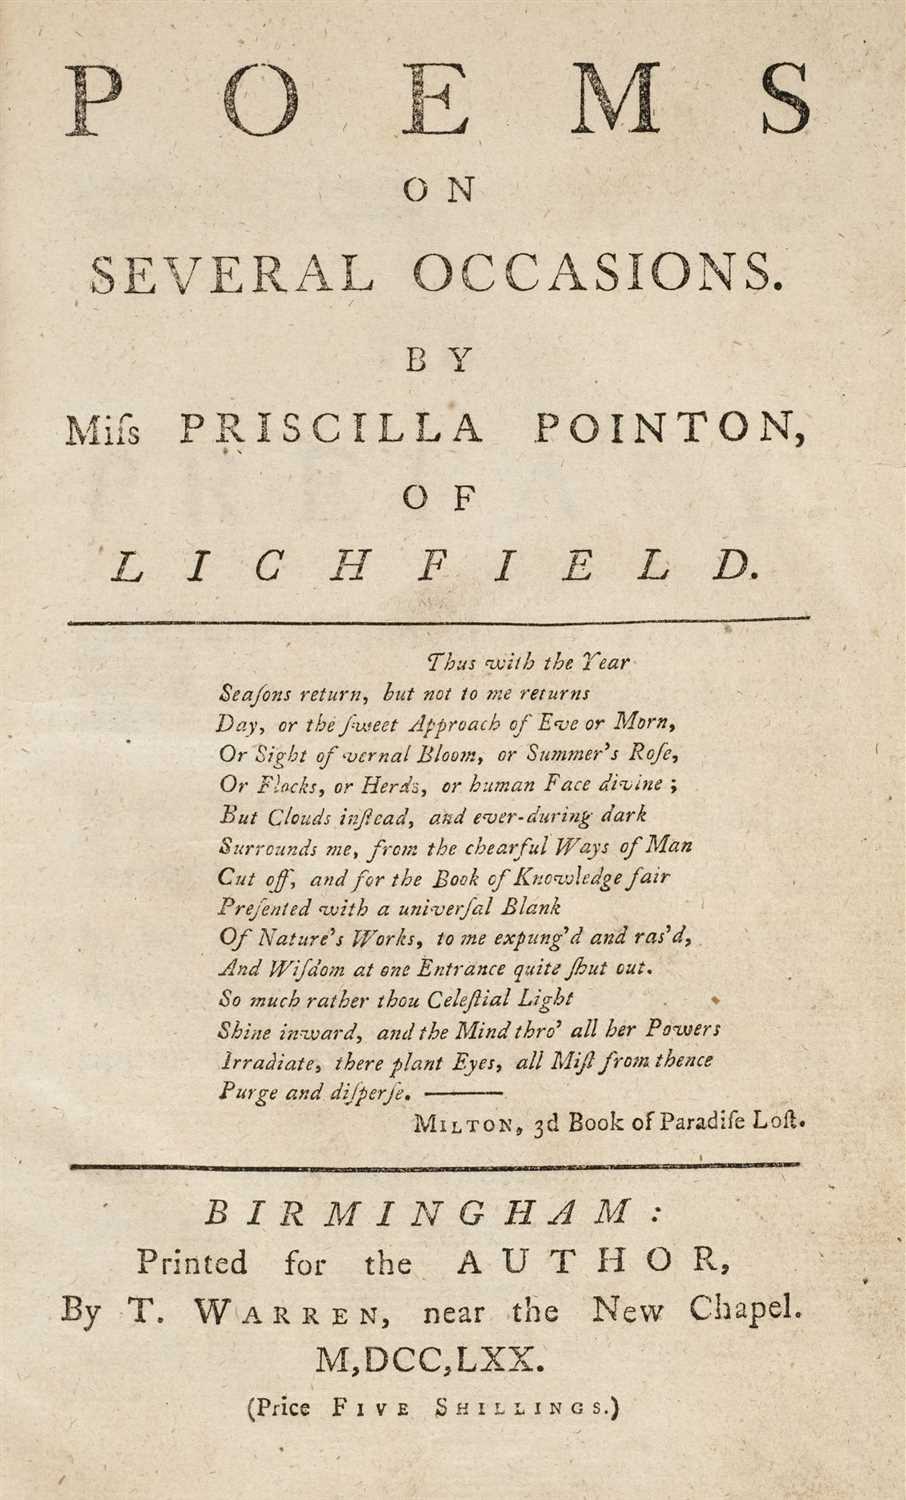 Lot 254 - Pointon (Priscilla). Poems on Several Occasions, 1st edition, Birmingham: for the author, 1770